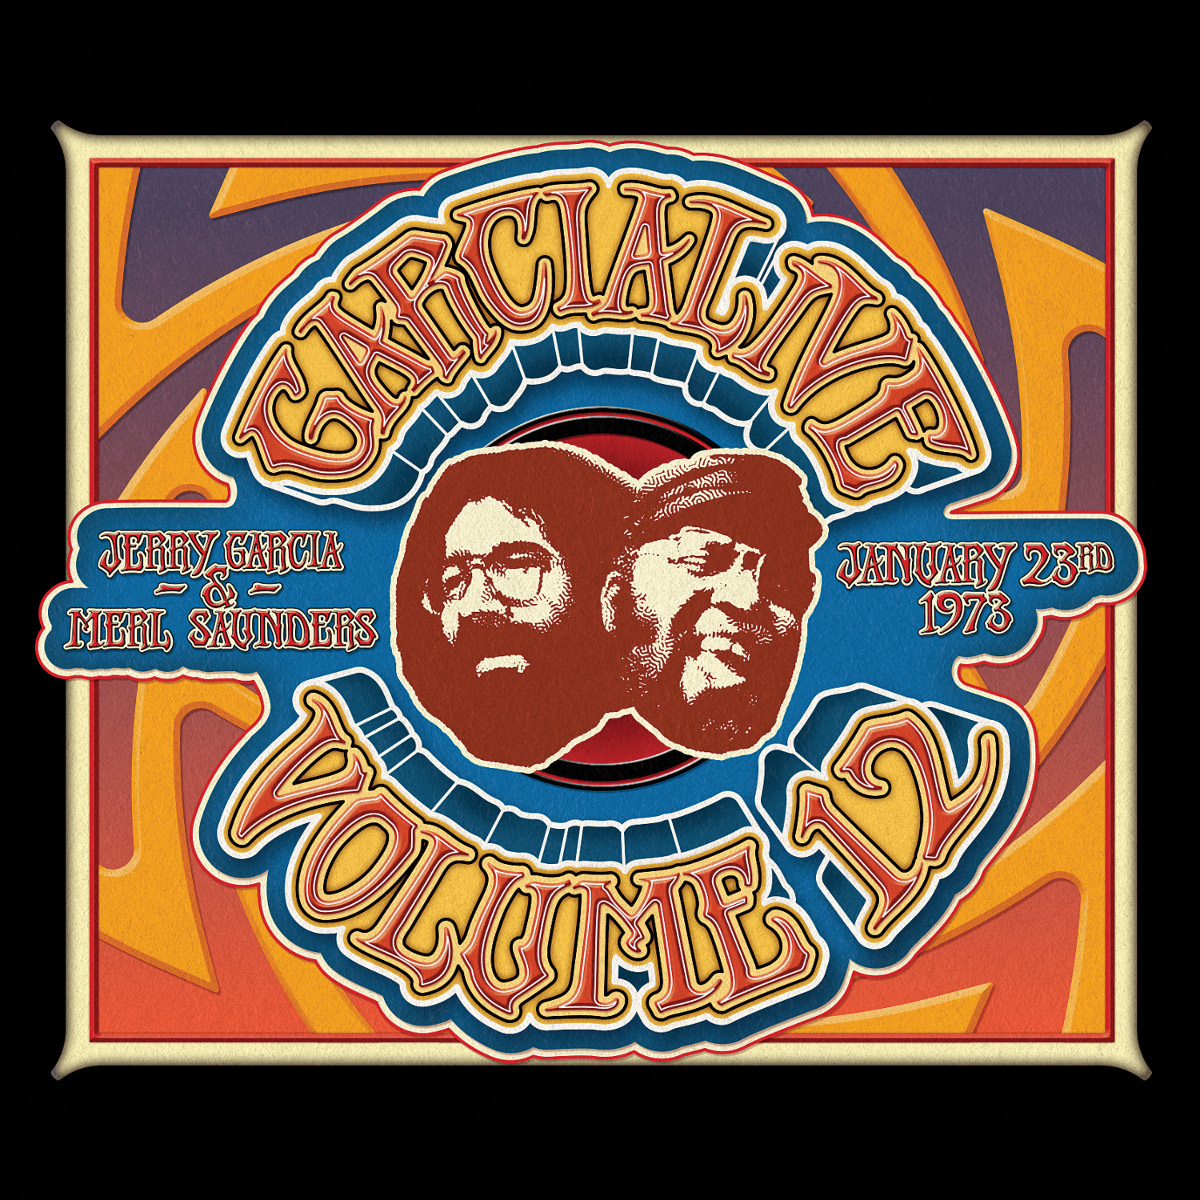 Jerry Garcia & Merl Saunders - GarciaLive Volume 12: January 23rd, 1973 The Boarding House (2019) [FLAC 24bit/88,2kHz]